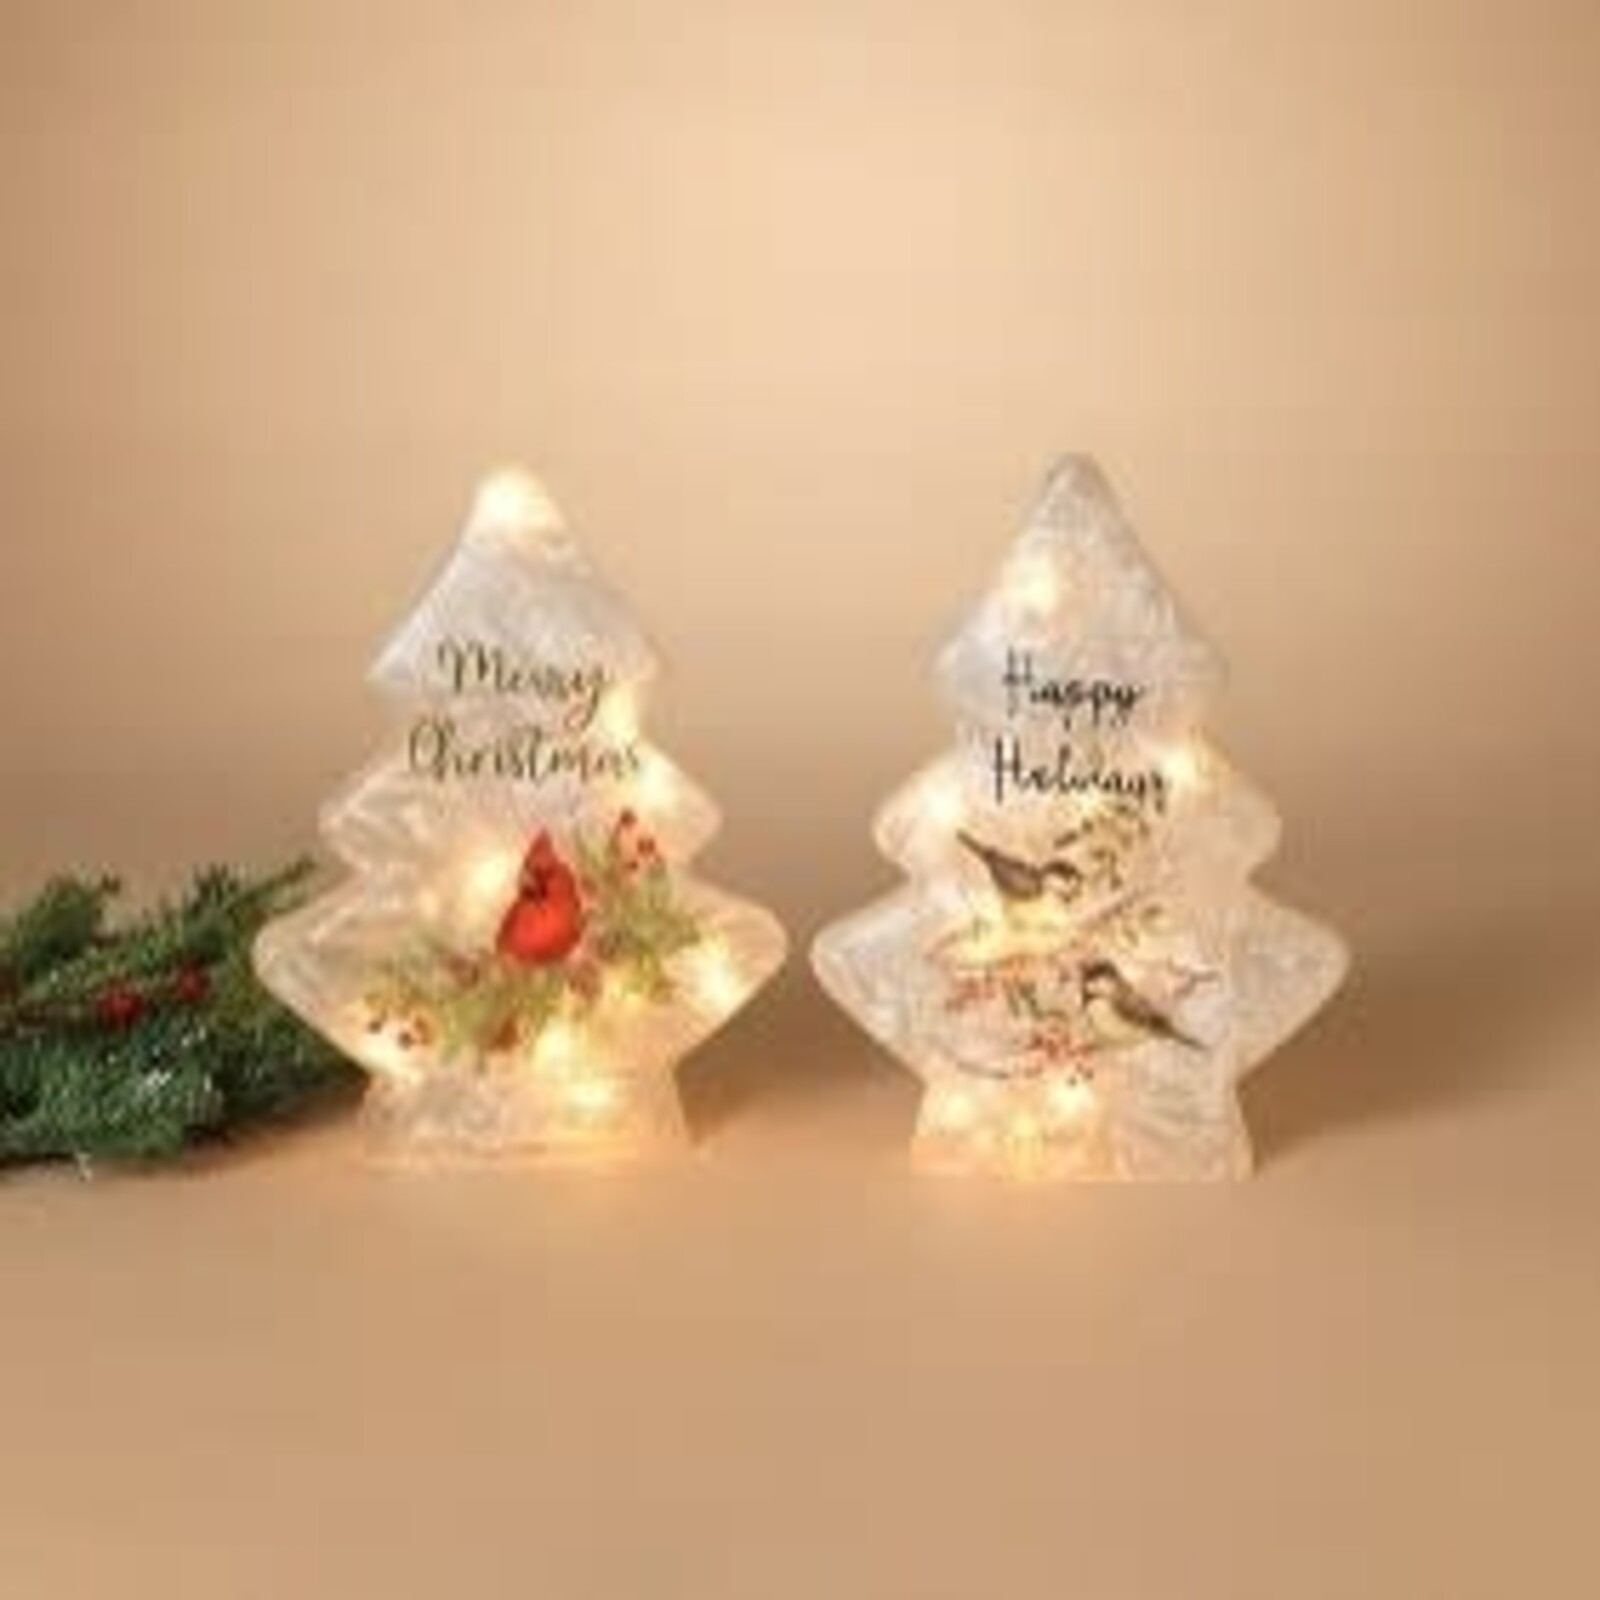 Gerson Lighted Frosted Glass Tree Cardinal/Chickadee  2693870 loading=